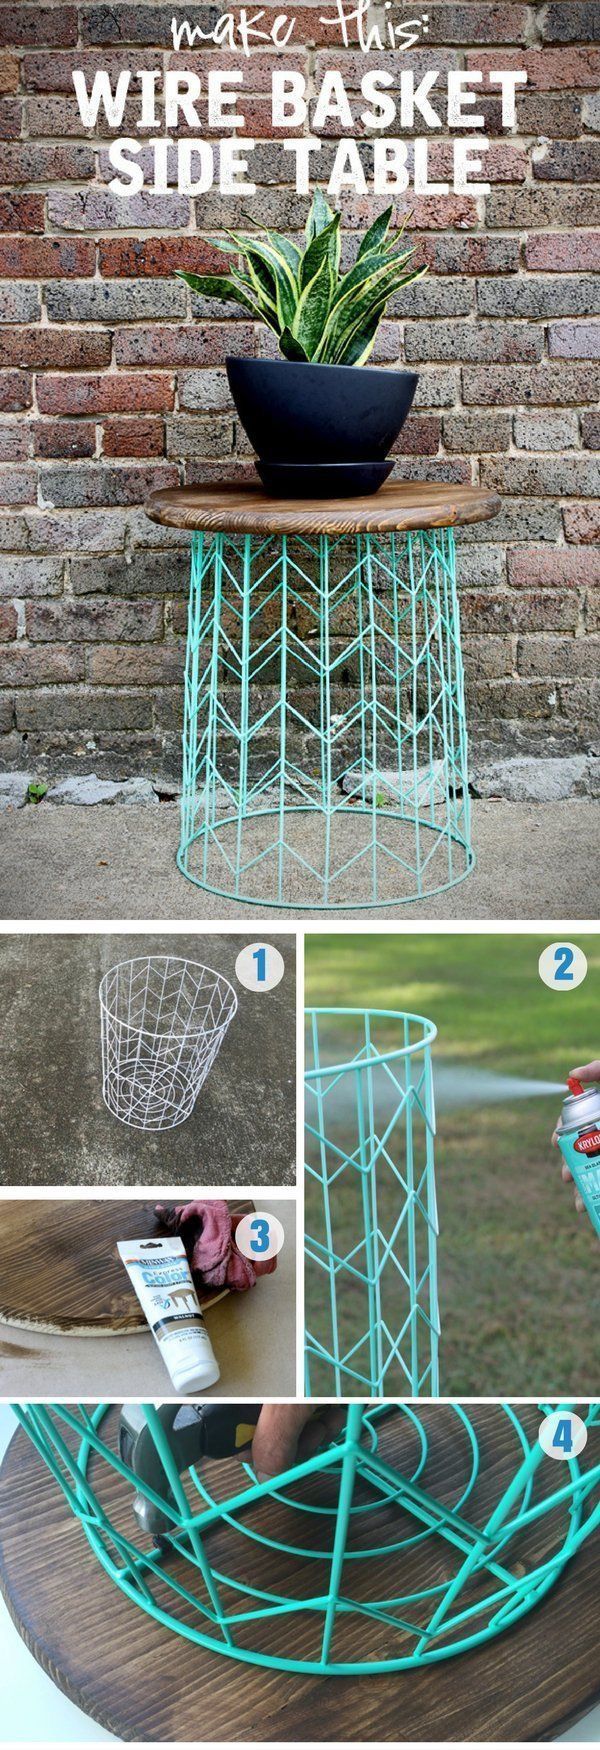 Side table from a wire basket - a 20 minute DIY idea